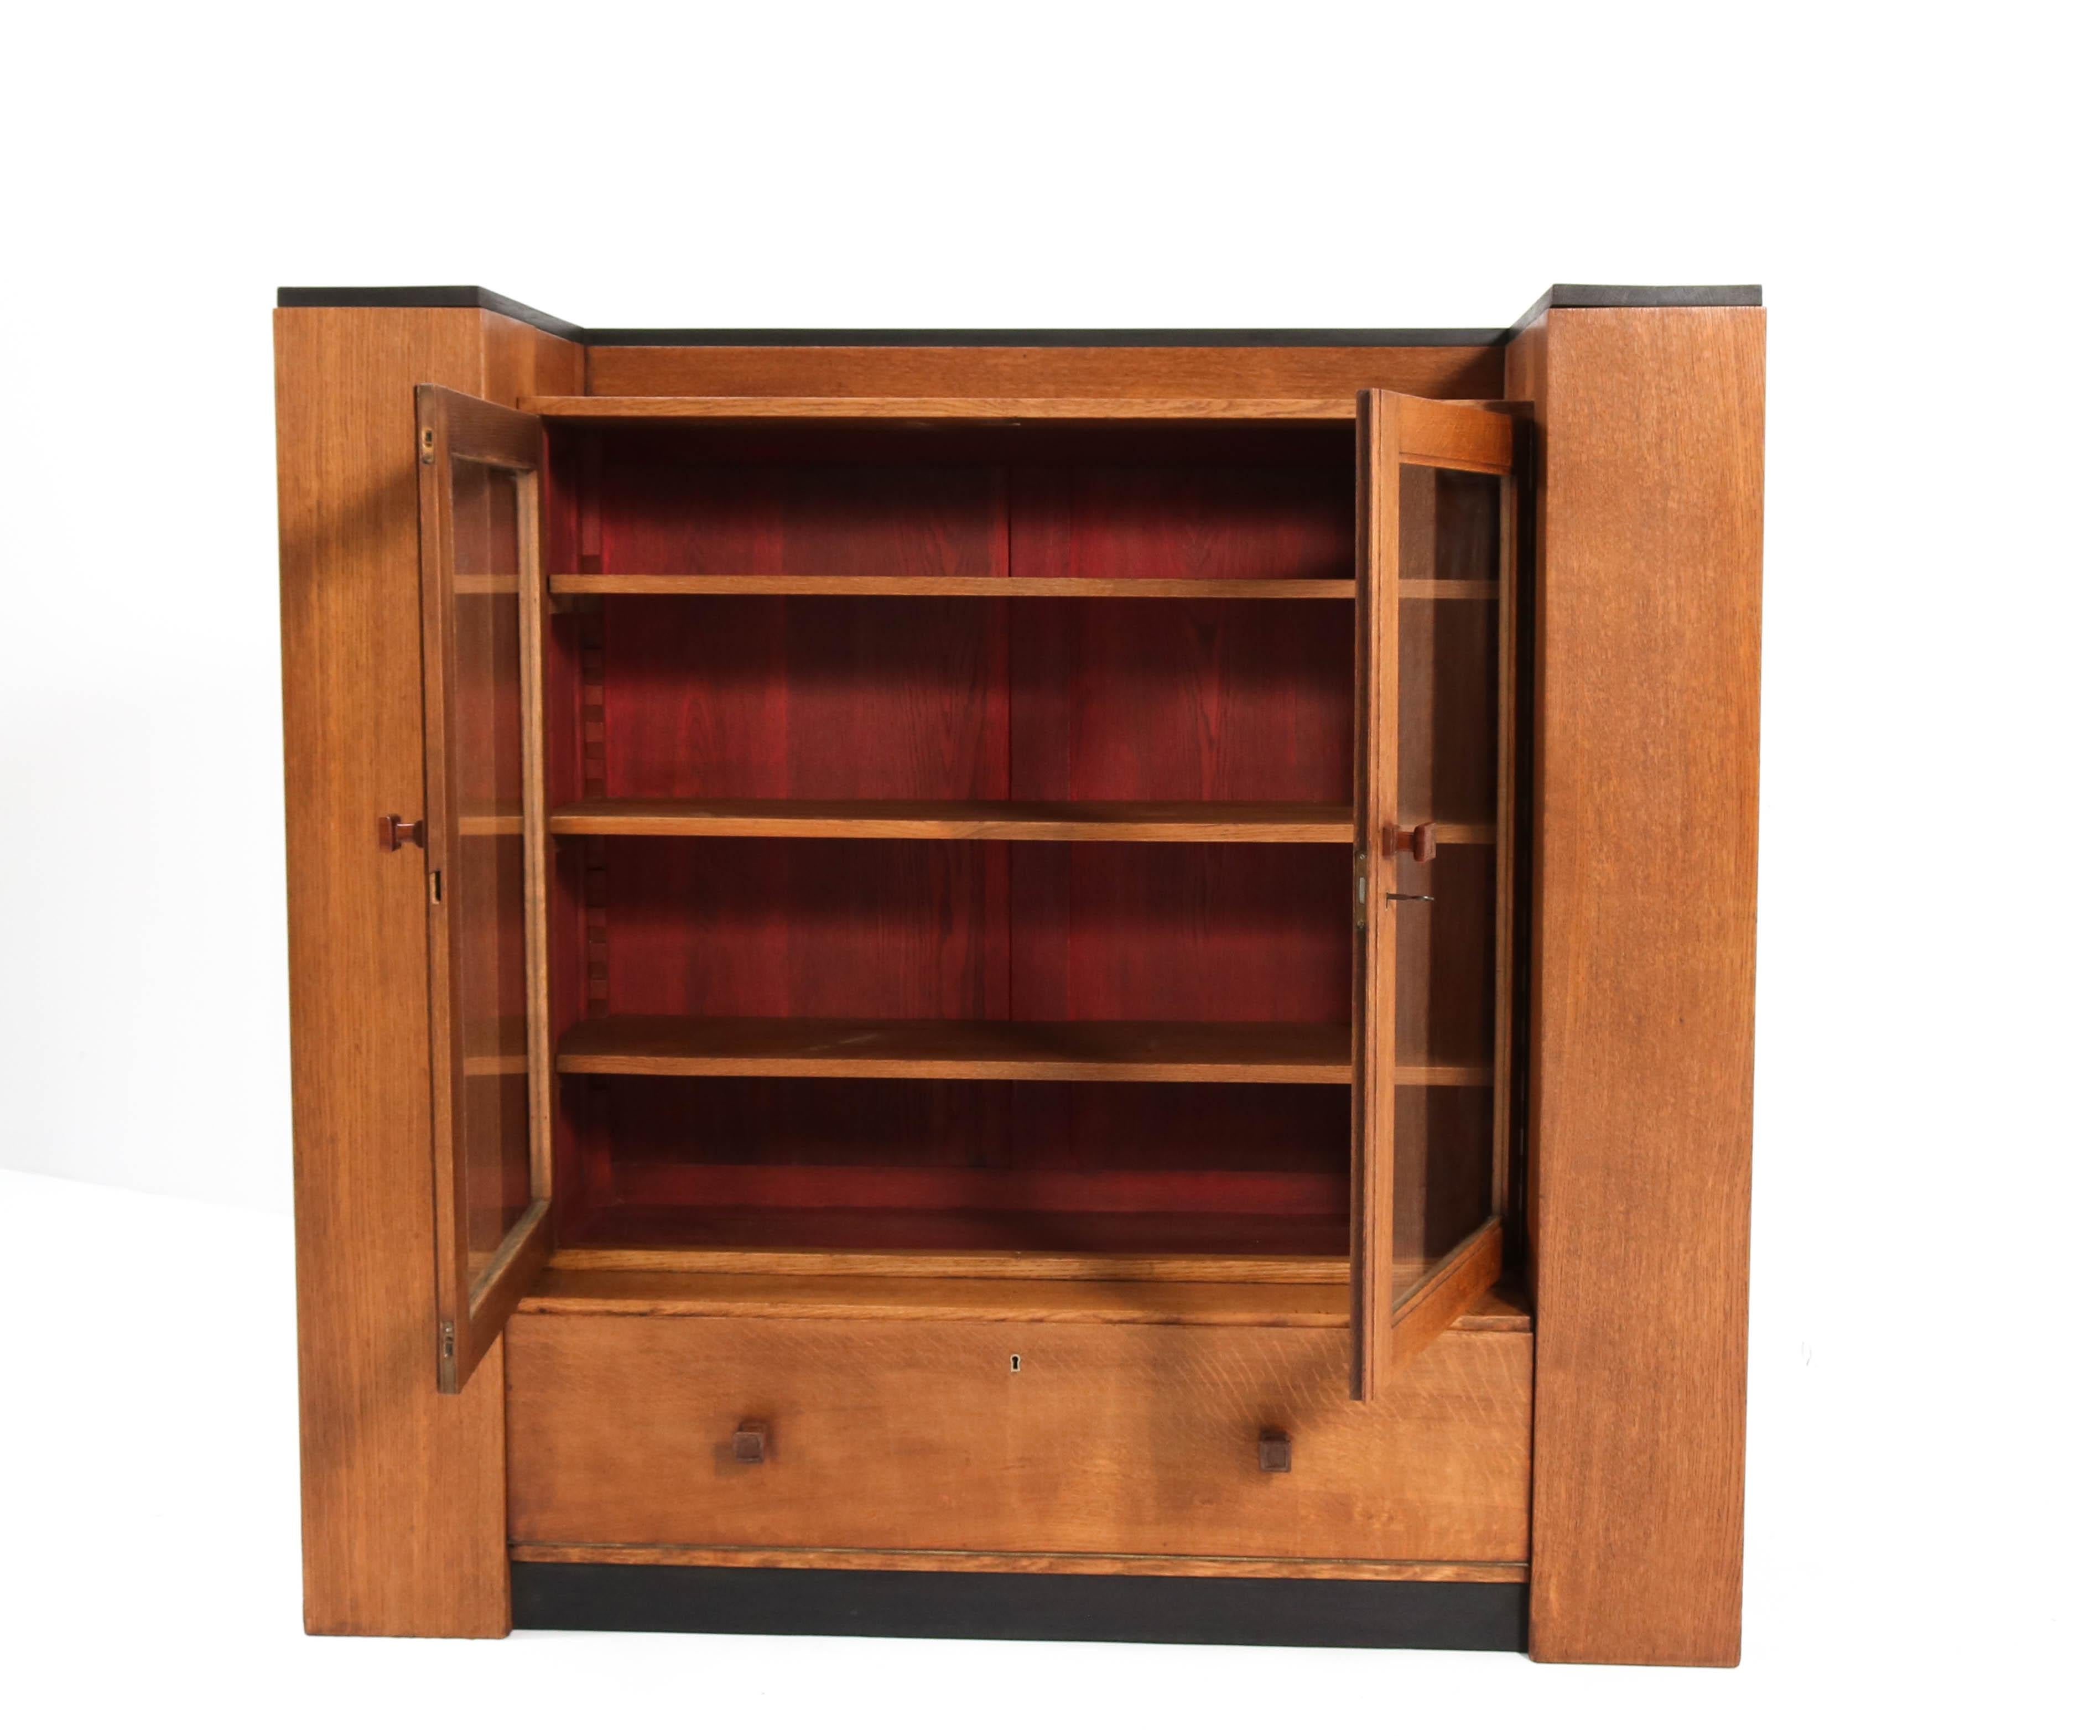 Magnificent and rare Art Deco Haagse School bookcase.
Design by Hendrik Wouda for Metz & Co. Amsterdam.
Striking Dutch design from the 1930s.
Solid oak with original padouk knobs.
Eleven original solid oak shelves adjustable in height.
In very